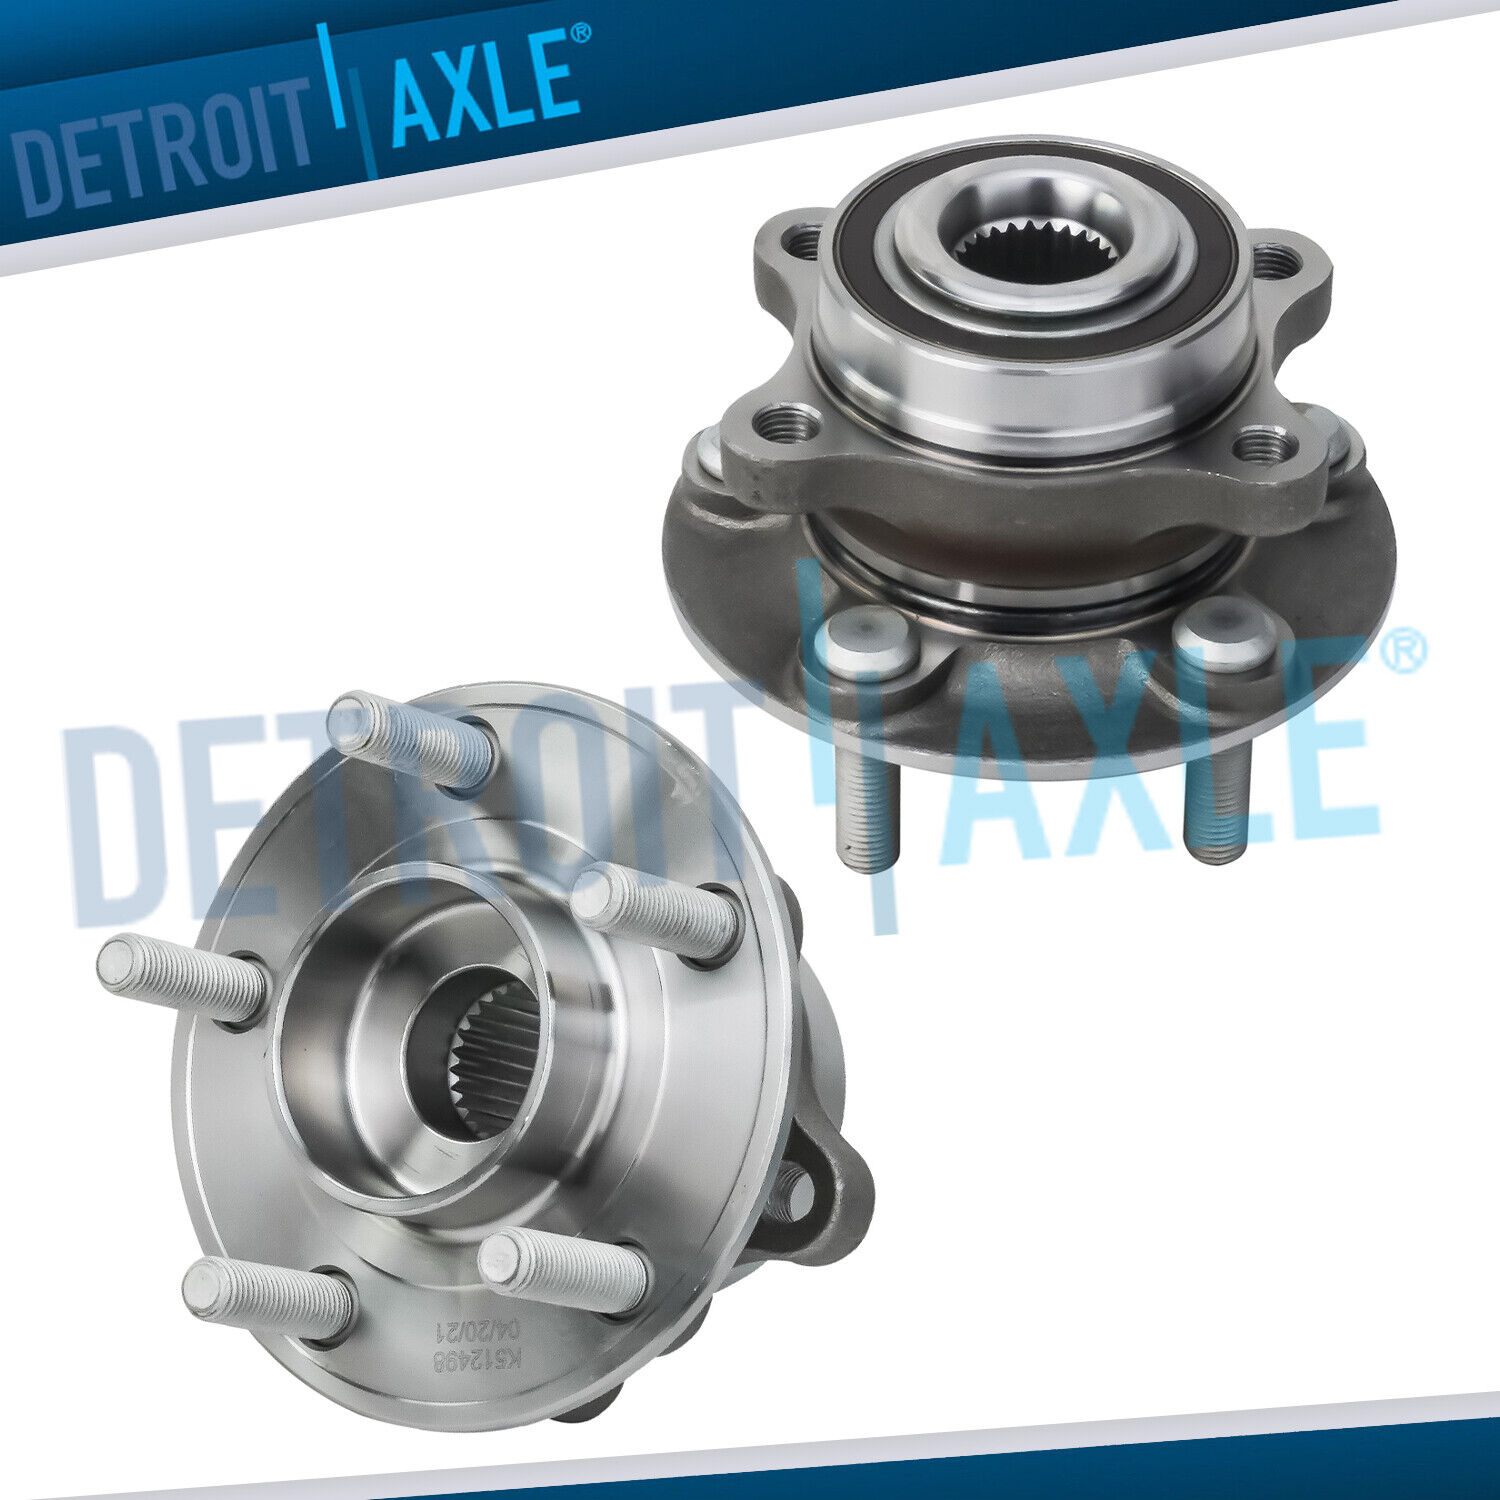 2 Front Wheel Bearing & Hub Assembly 2013 - 2015 2016 Ford Fusion & Lincoln MKZ